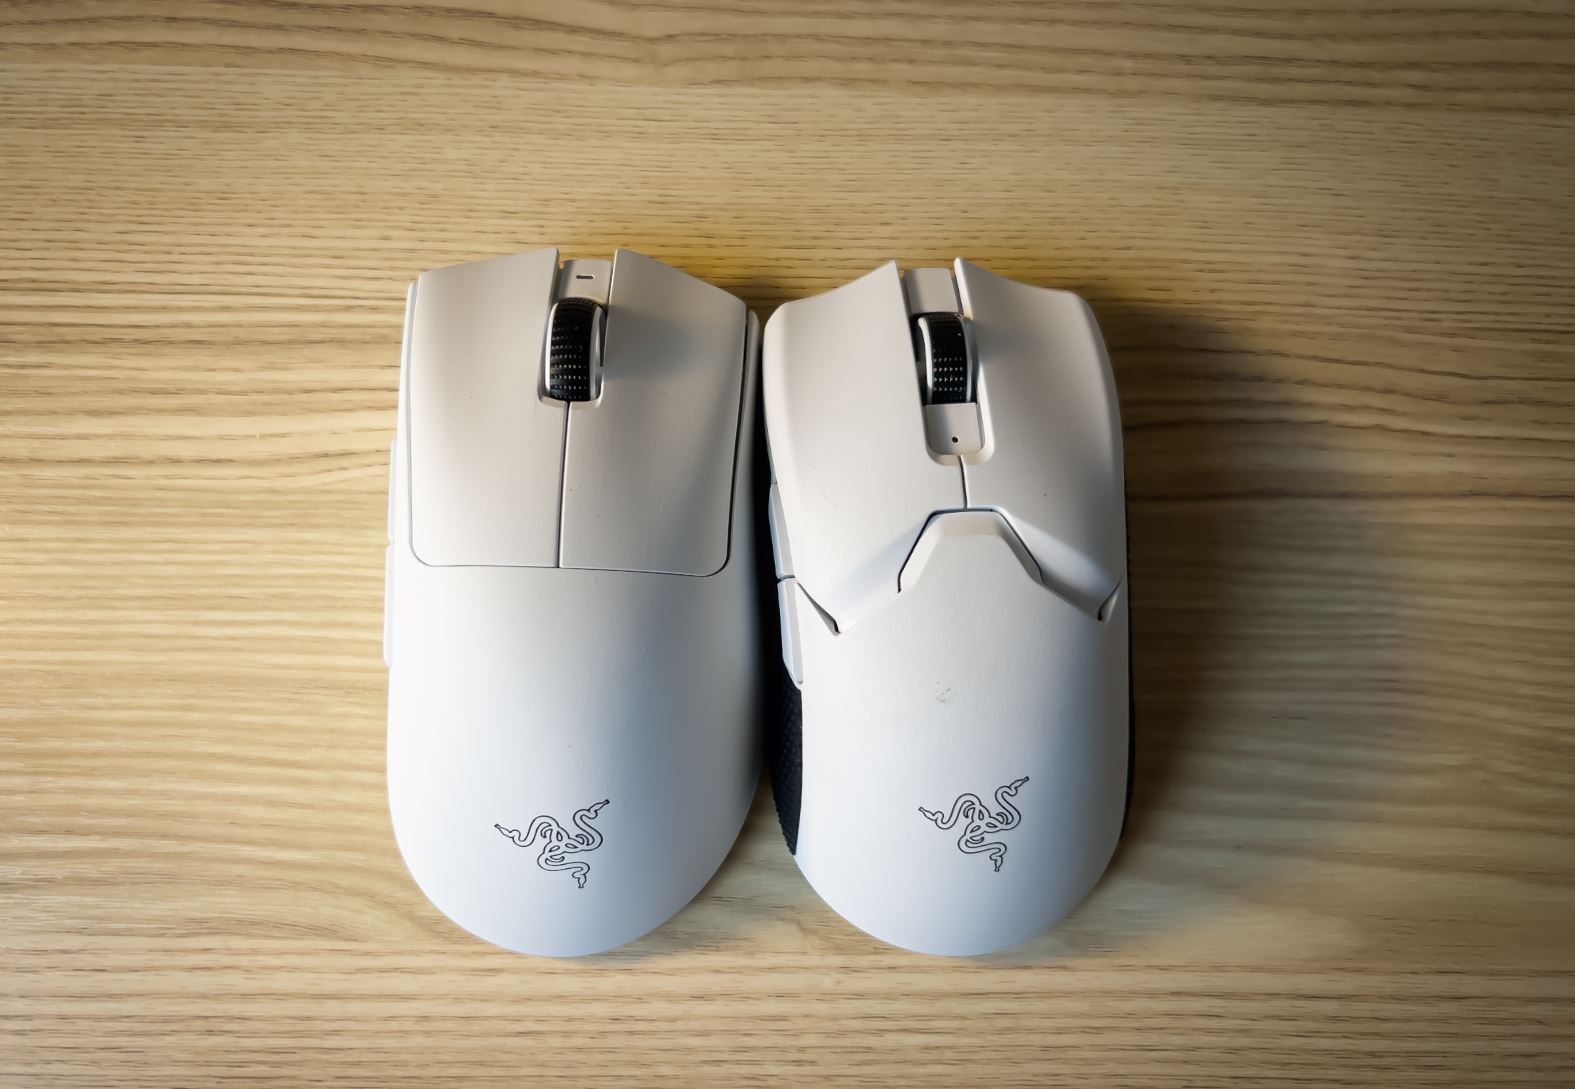 Razer DeathAdder V3 Pro review: the perfect palm grip mouse ...